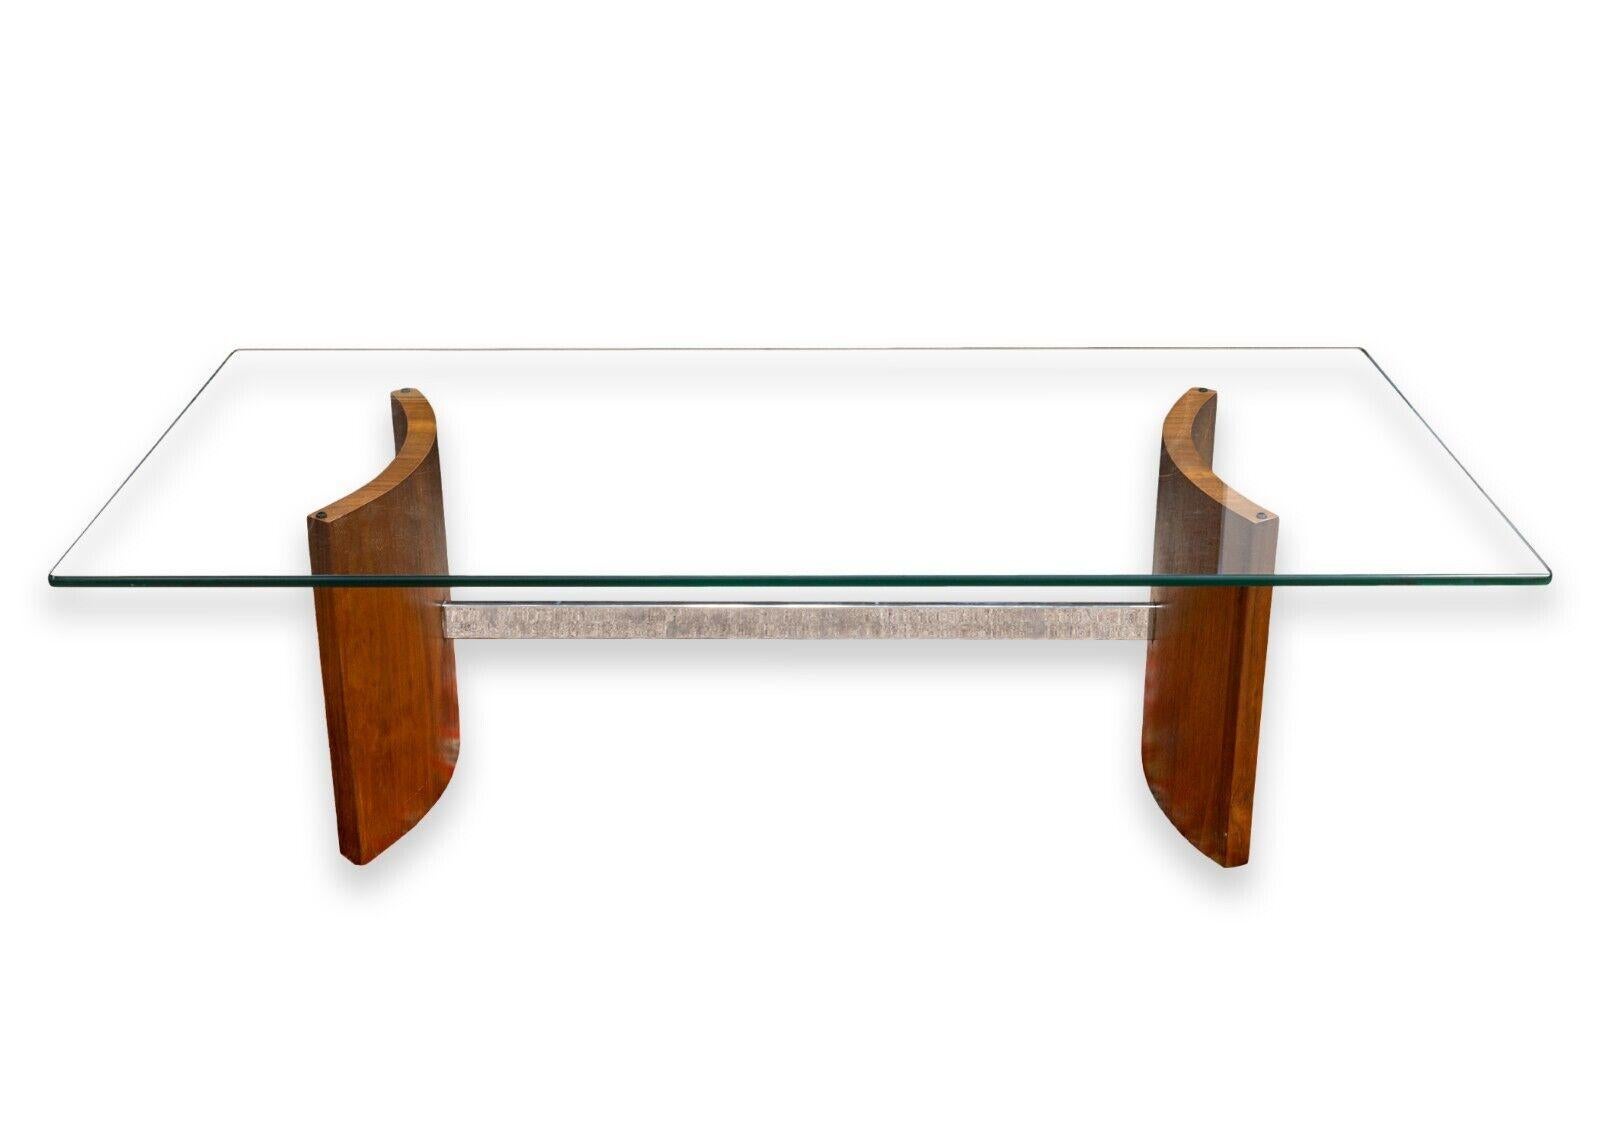 A Vladimir Kagan Propeller glass coffee table. A fantastic mid cenruty modern table with great design, great materials, and a great name in Vladimir Kagan. This piece features a rounded rectangular glass table top, two curved wooden legs, and a